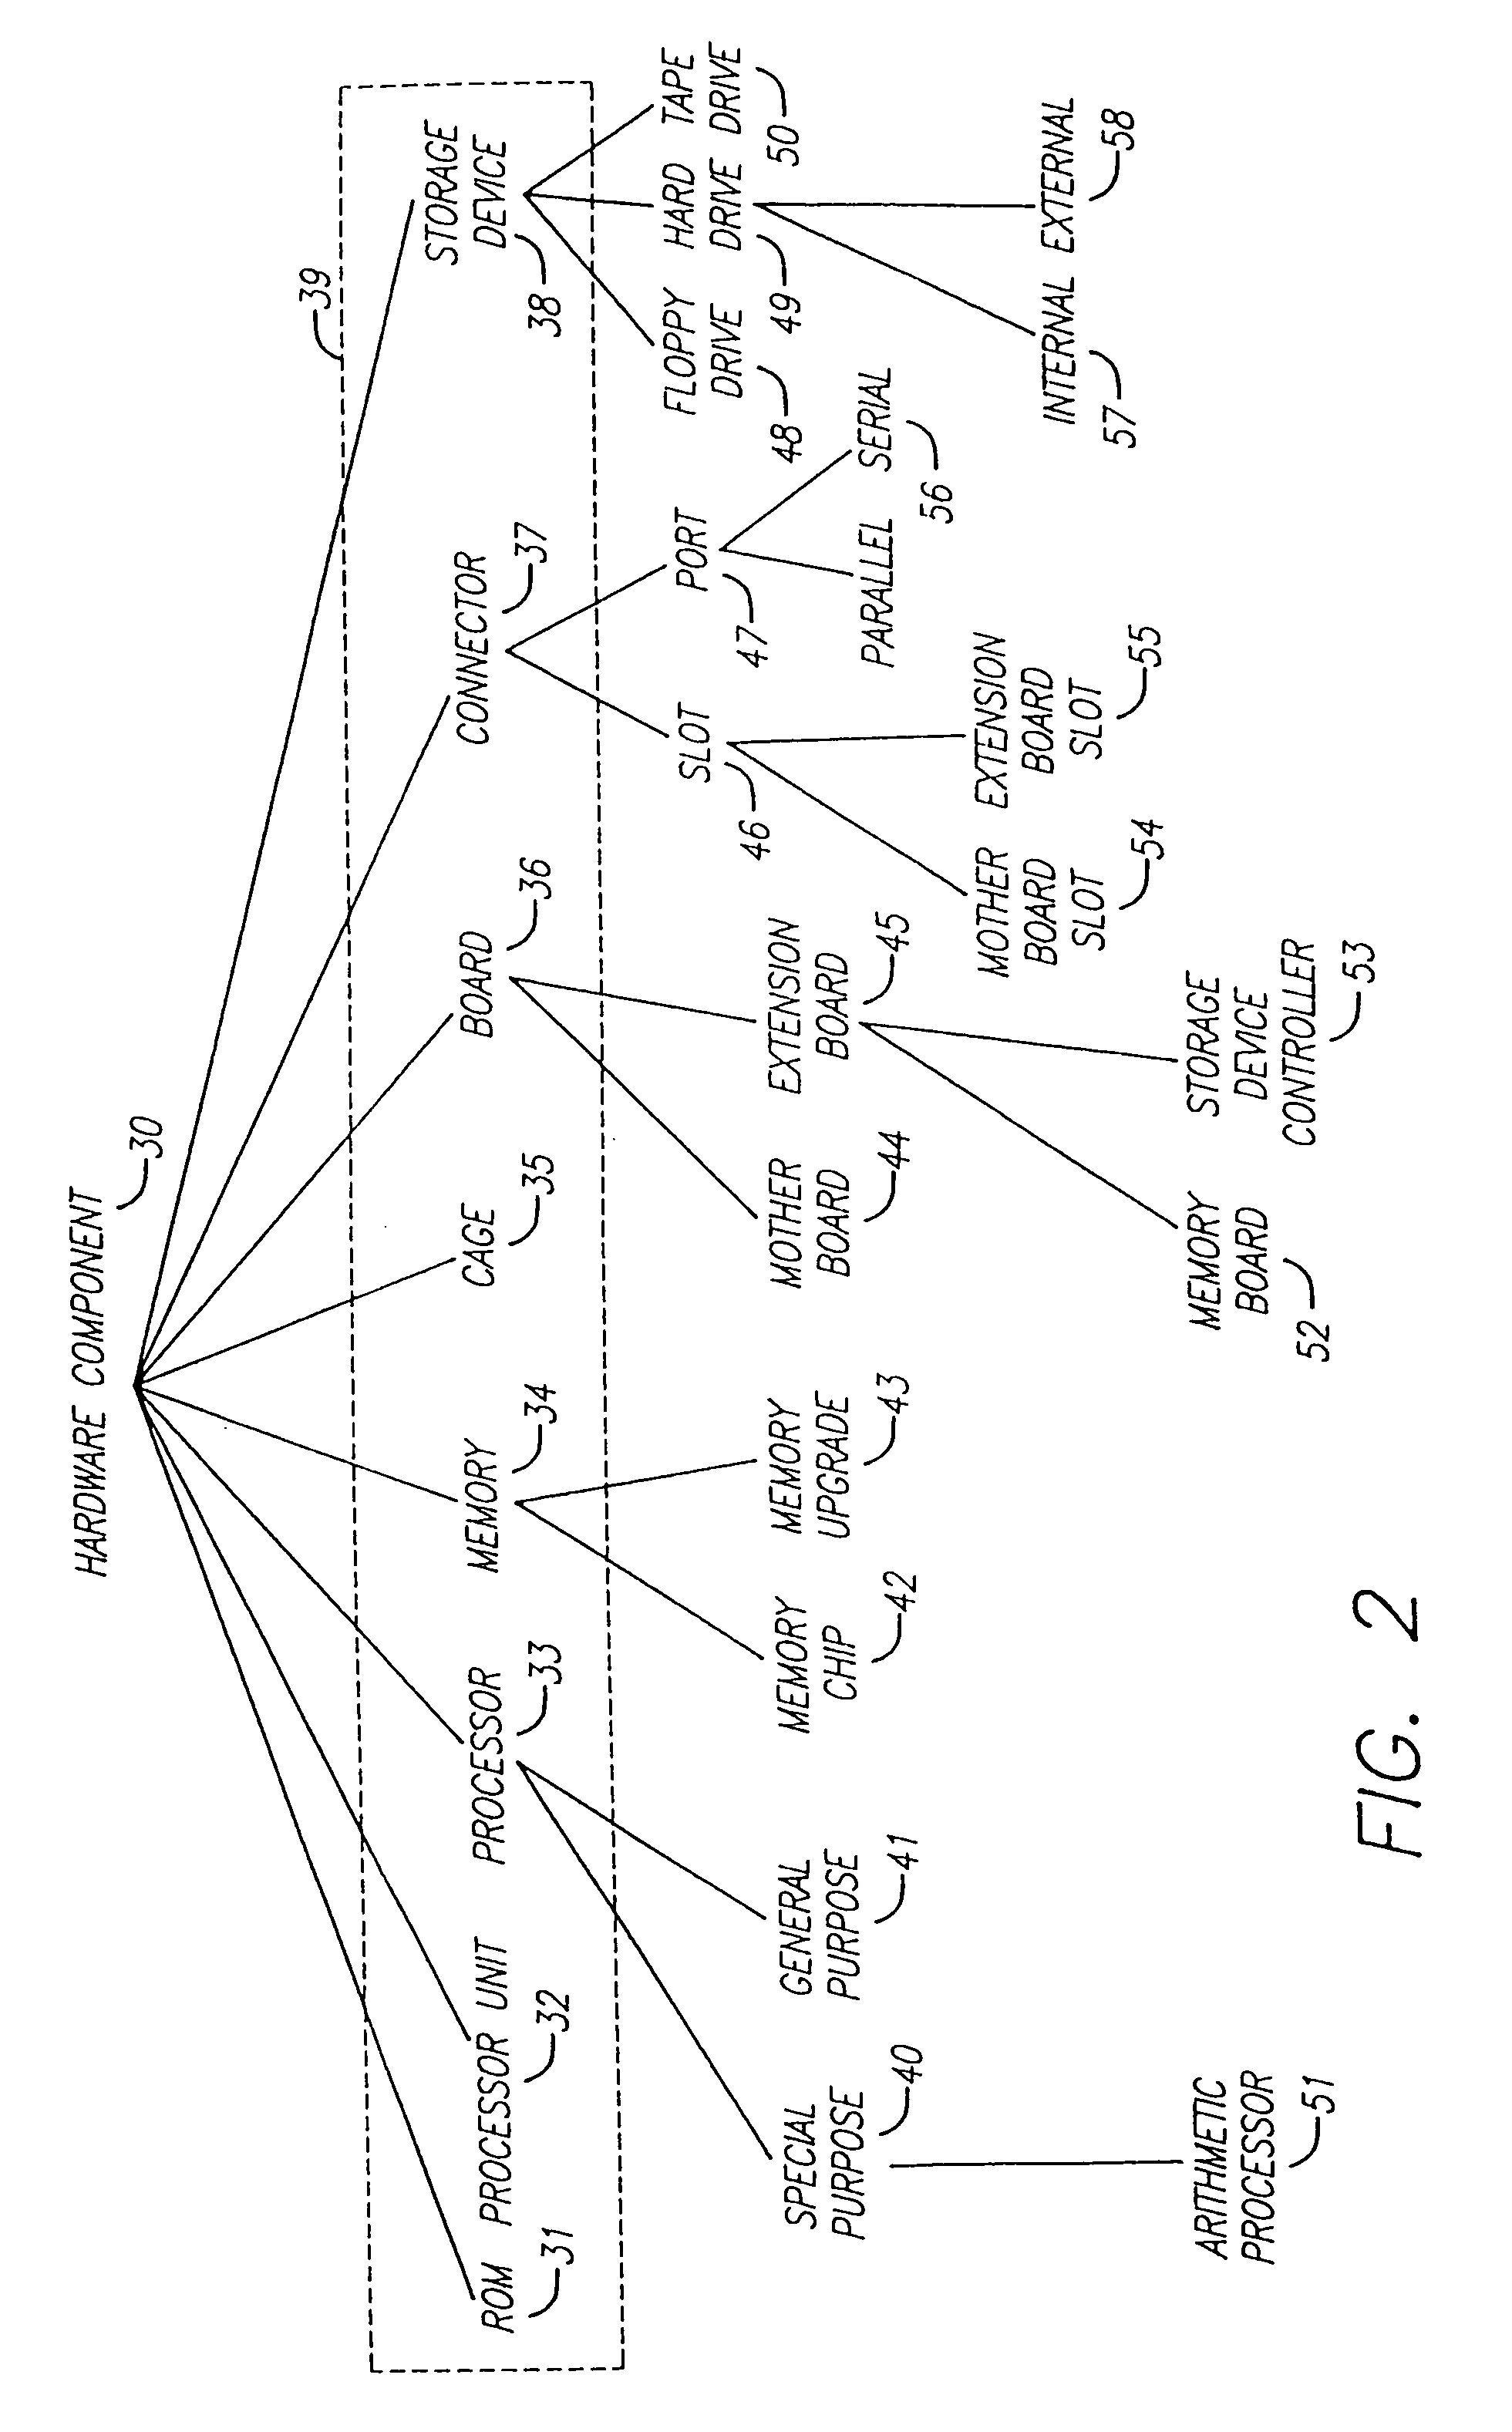 Method and apparatus for configuring systems